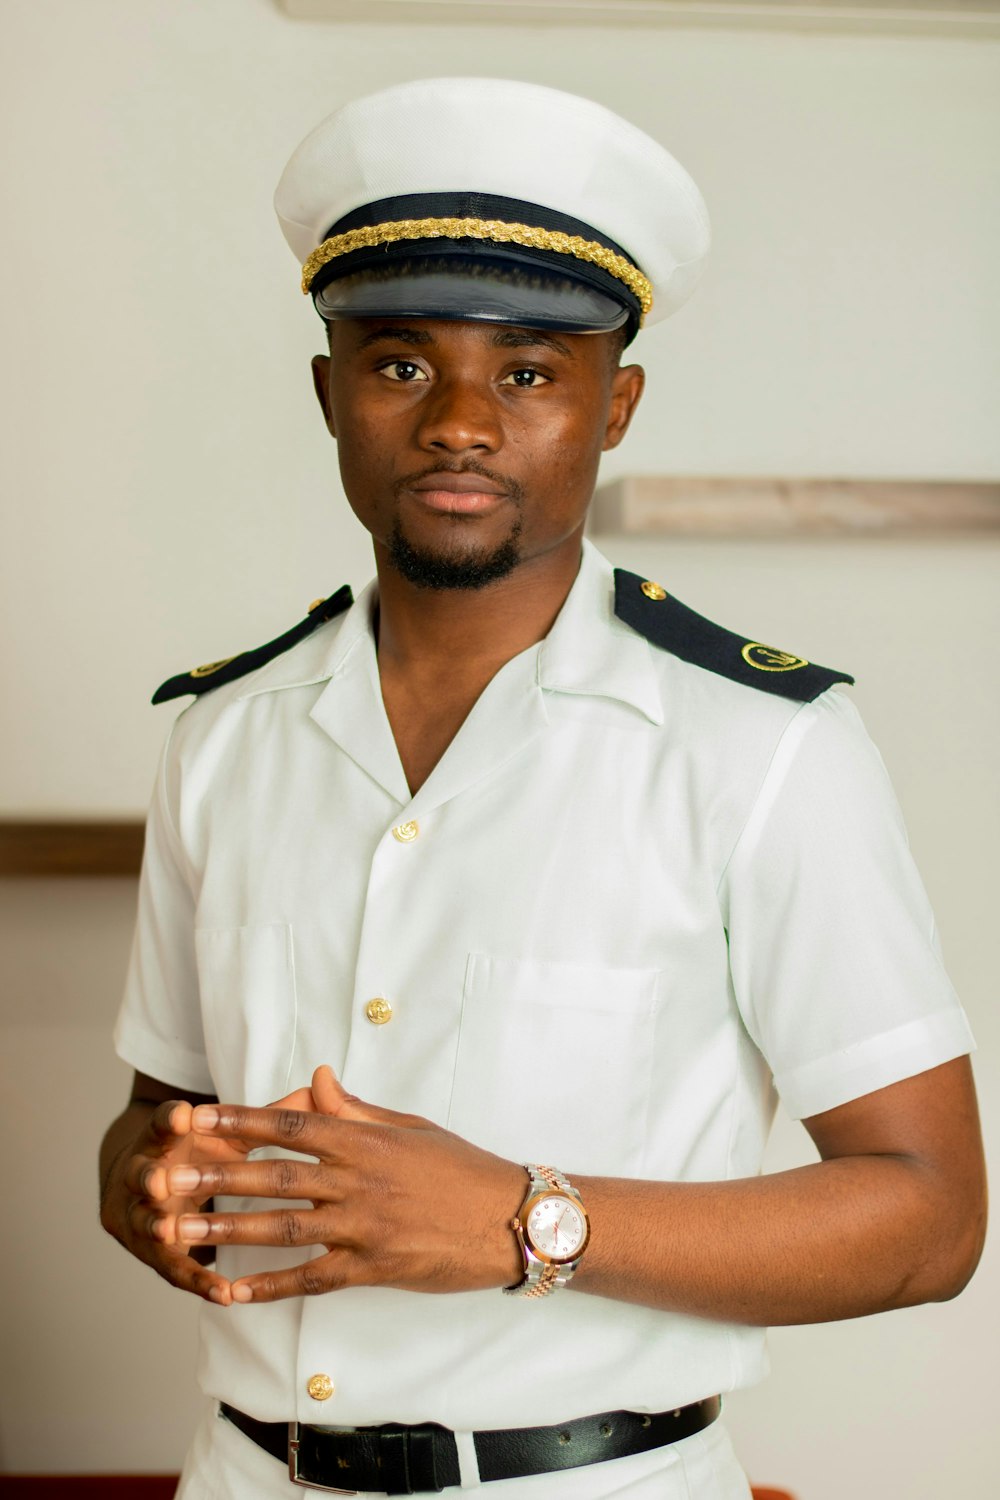 a man in a white uniform is posing for a picture